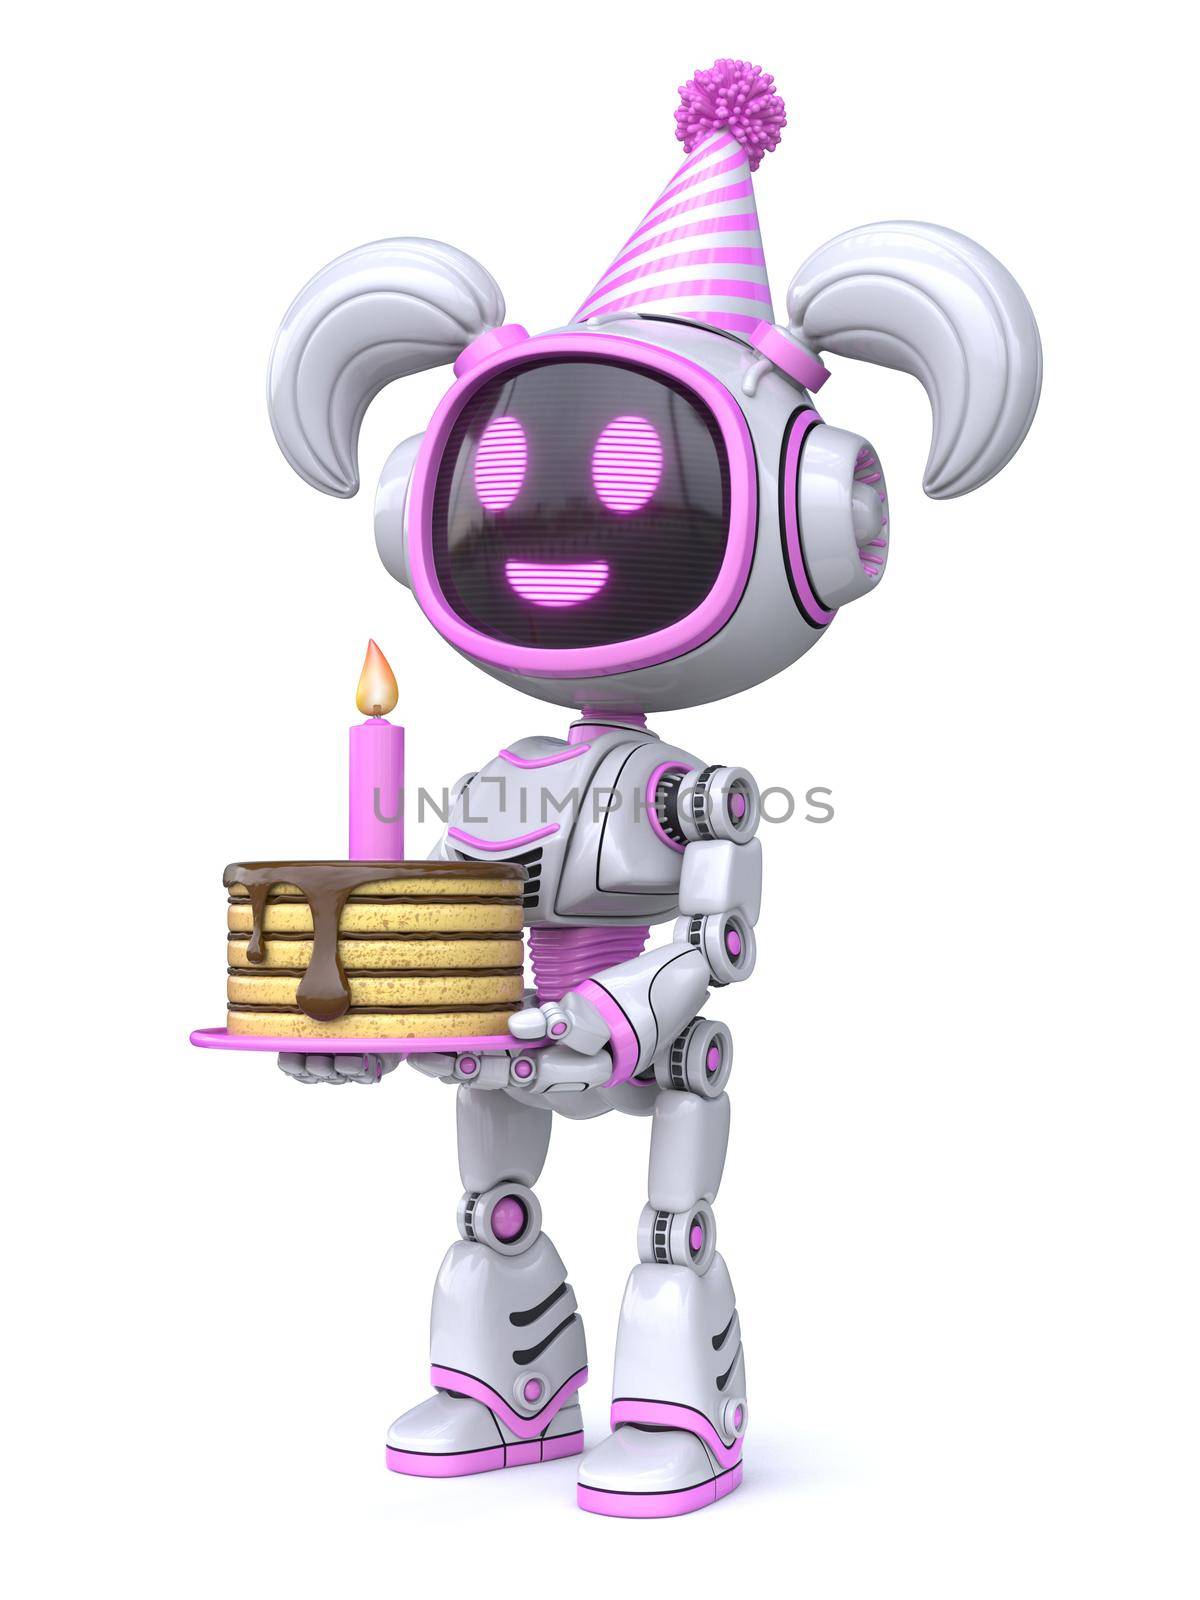 Cute pink girl robot with birthday cap and cake 3D rendering illustration isolated on white background